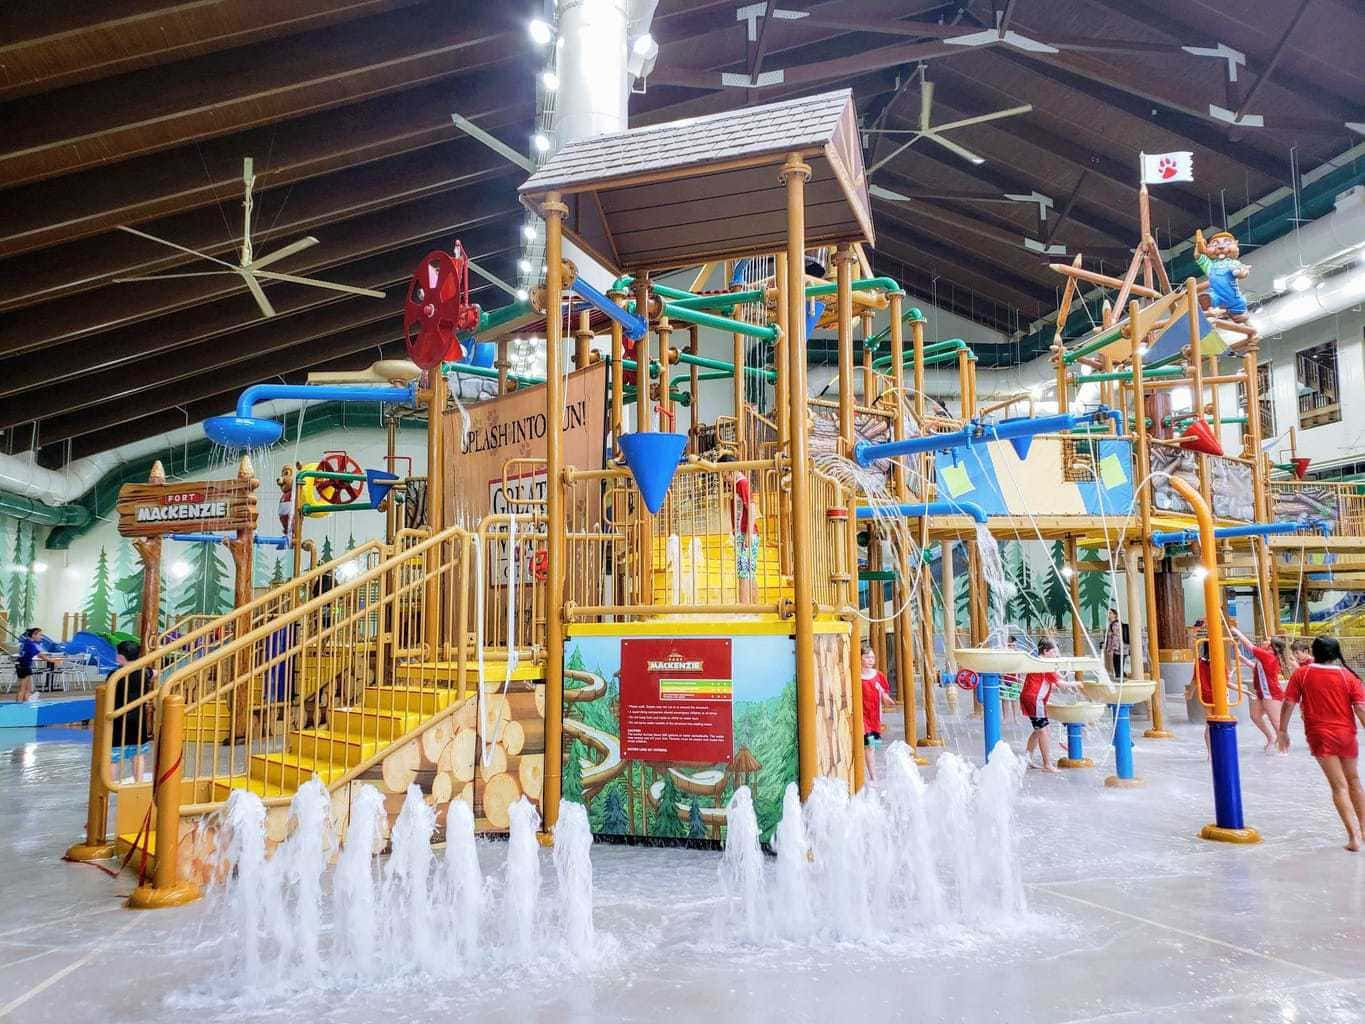 A Water Park With A Slide And Water Fountains